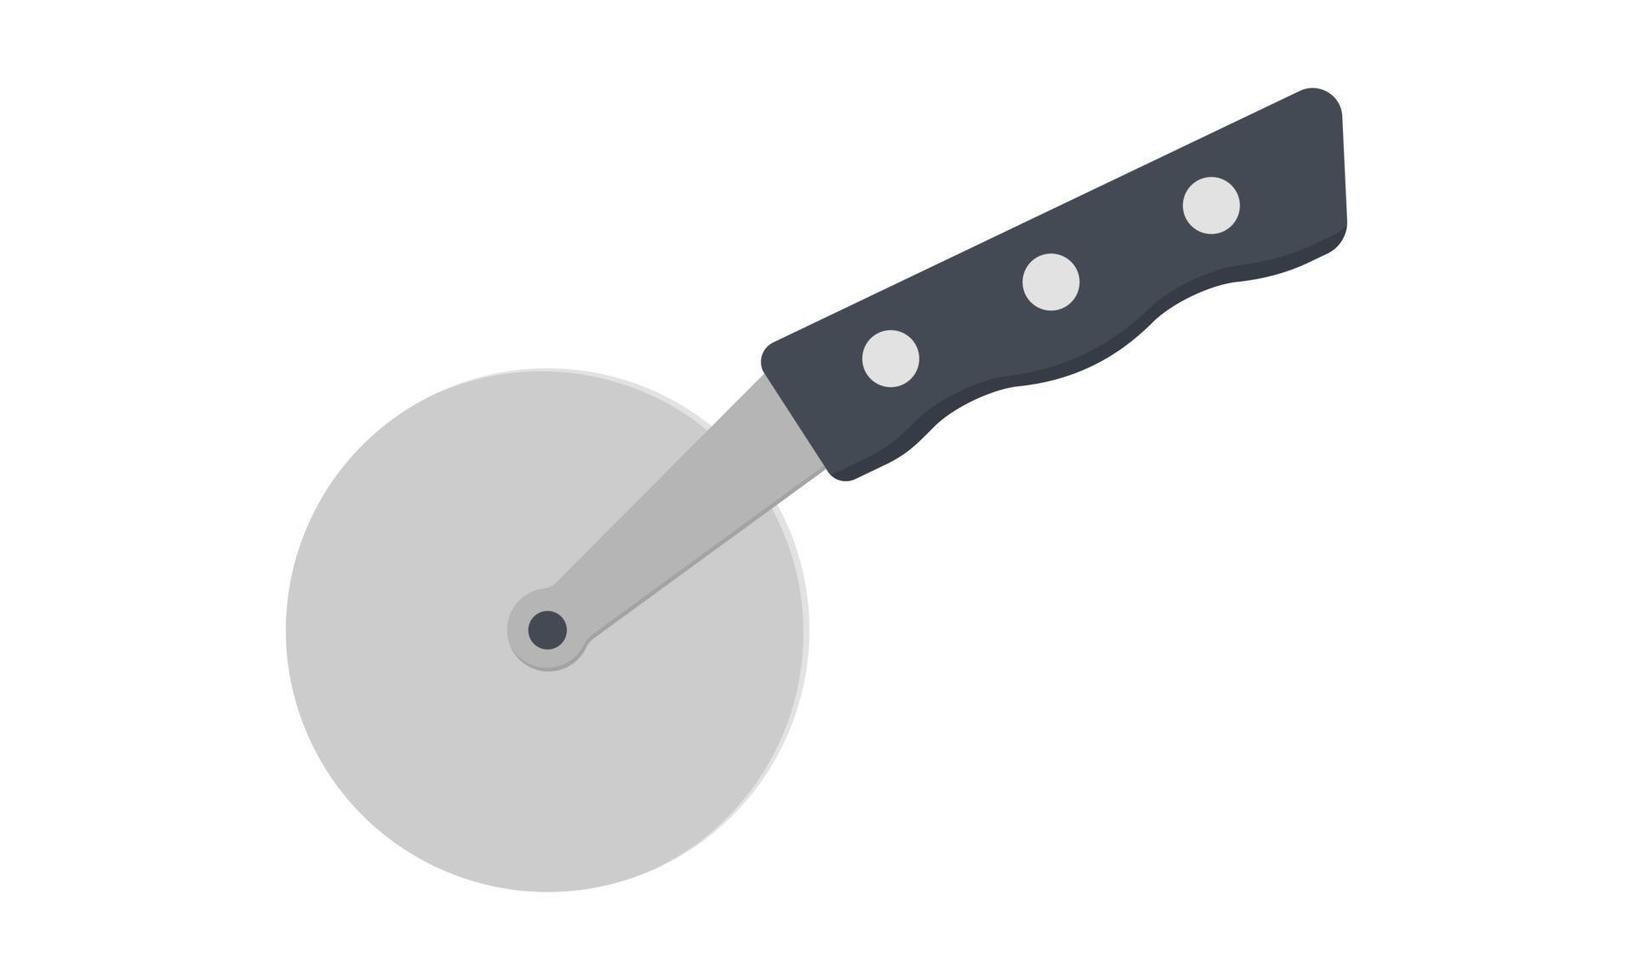 Pizza cutter flat icon vector illustration. Simple pizza knife sign flat vector design. Sharp stainless steel disk with plastic handle web icon. Slicing tool, cooking equipment, kitchenware clipart